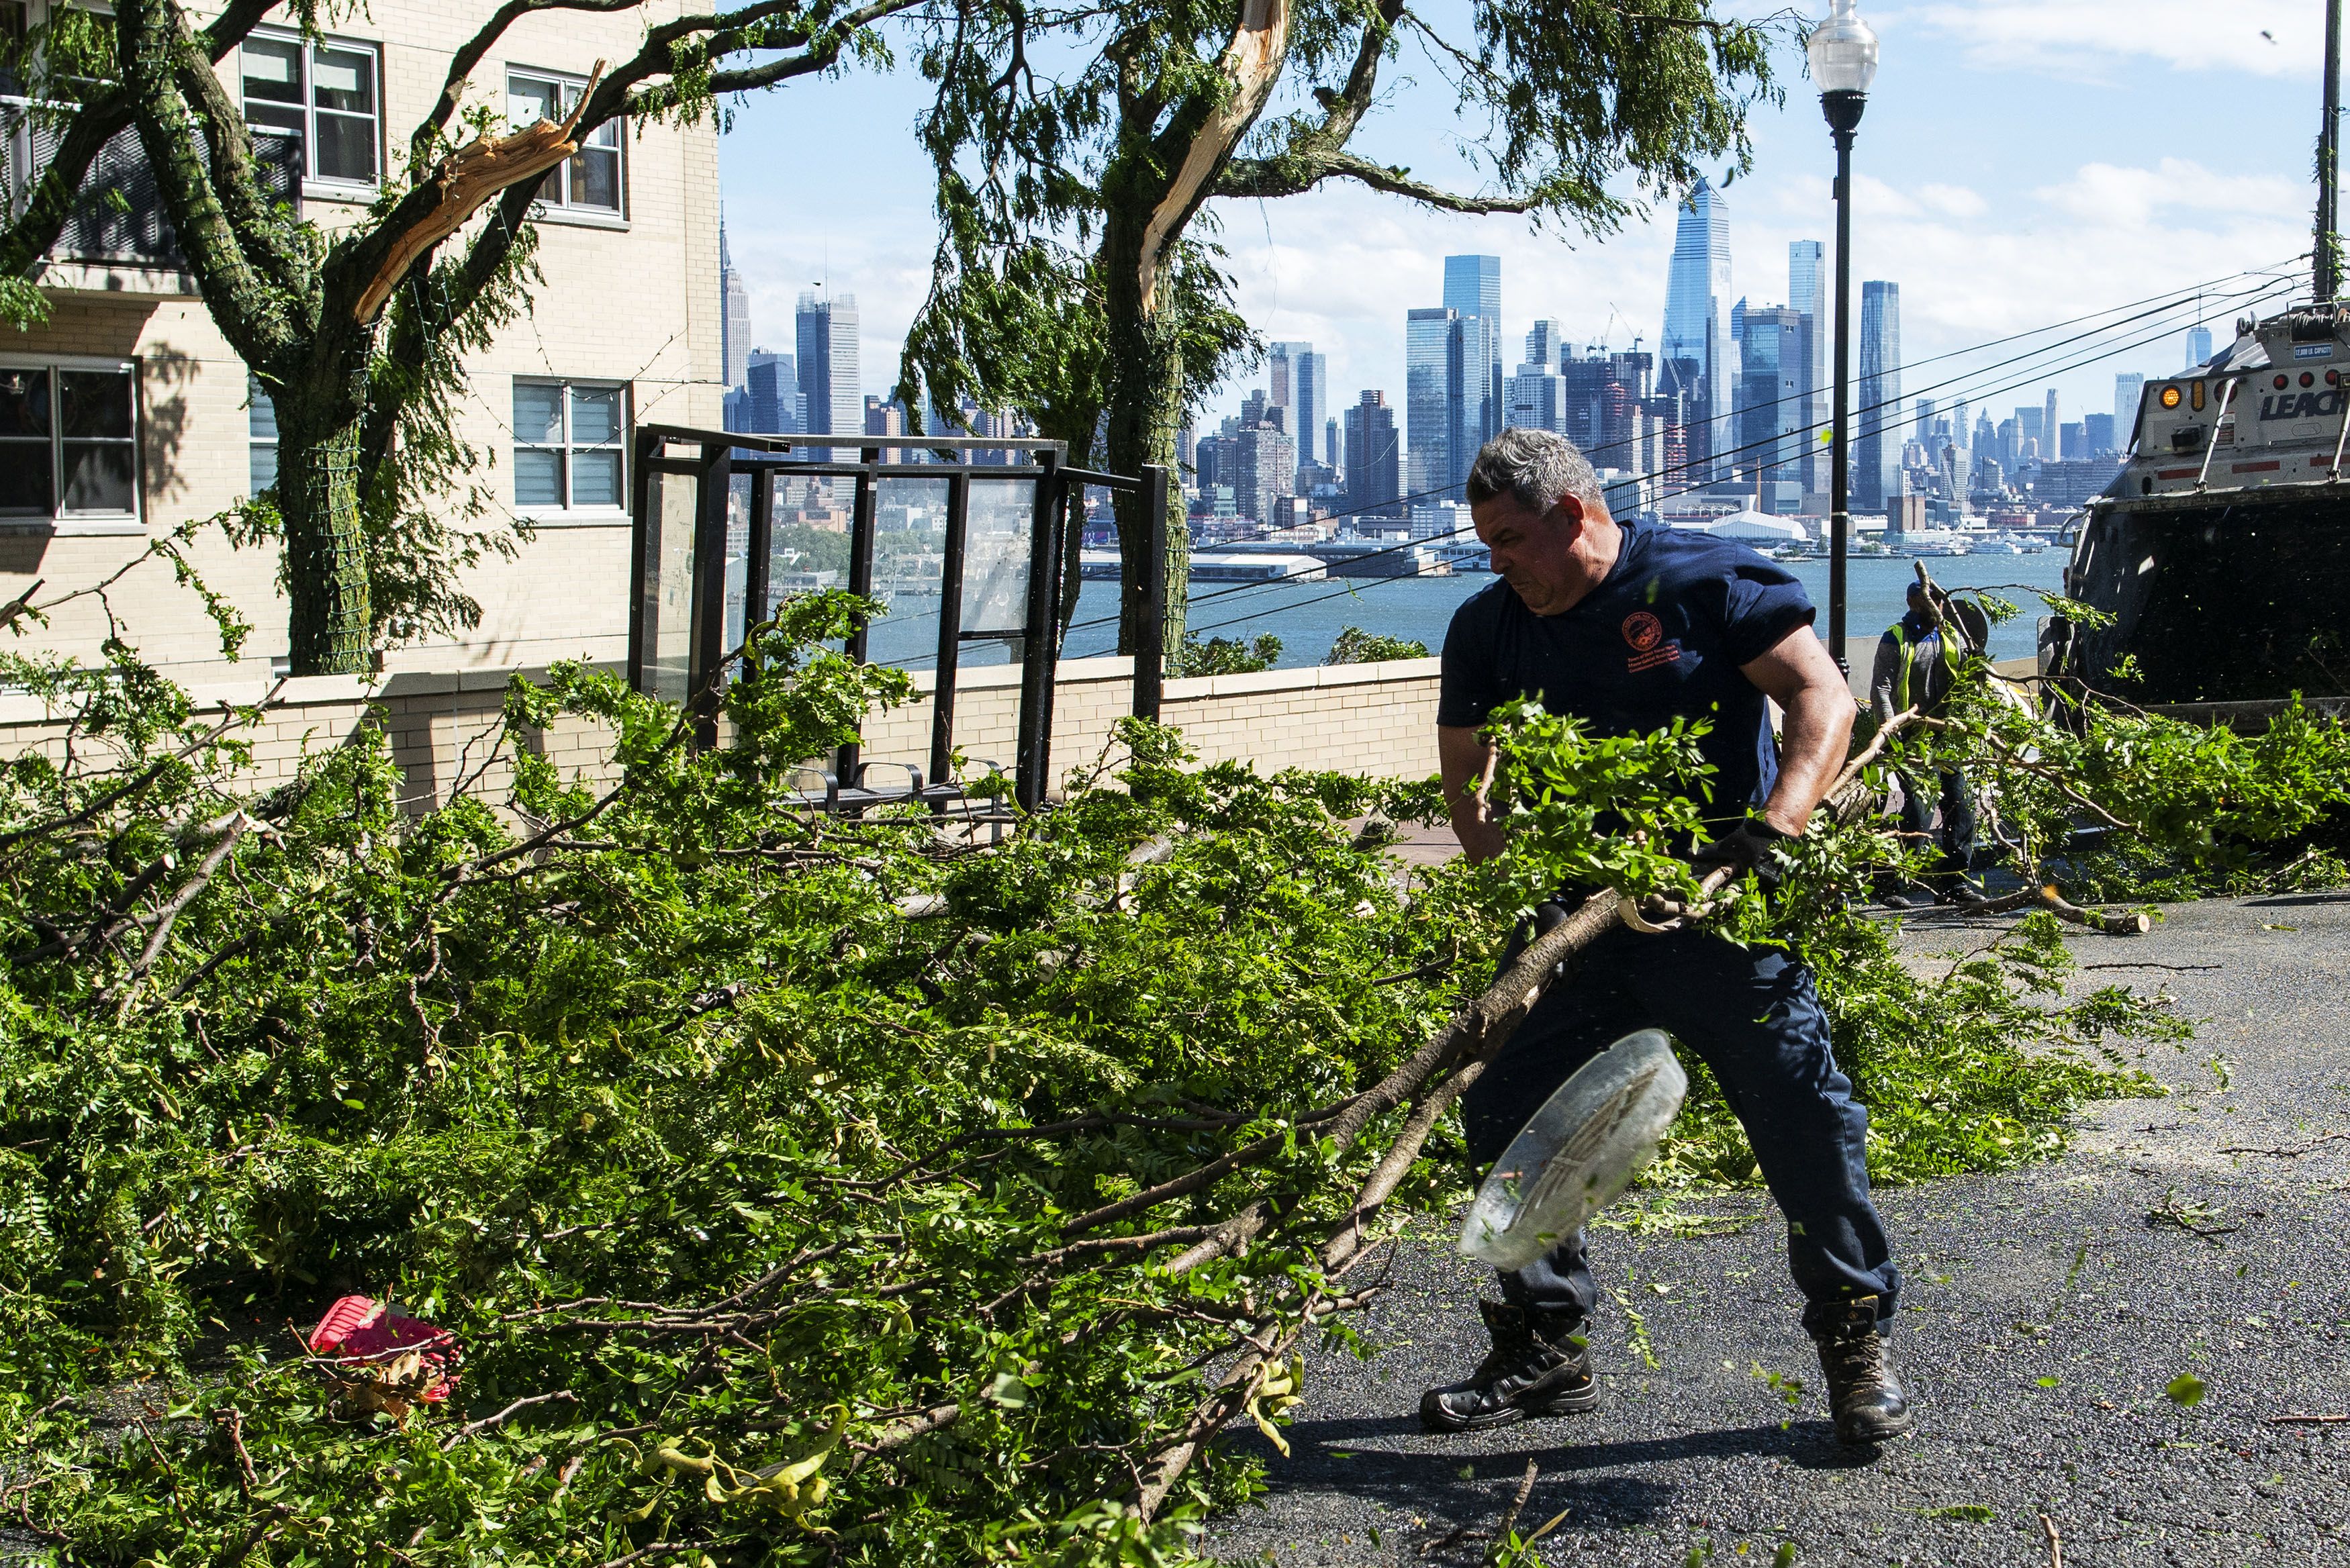 Workers clean the street of debris and branches after Tropical Storm Isaias passed through the region on August 4, 2020 in Guttenberg, New Jersey.